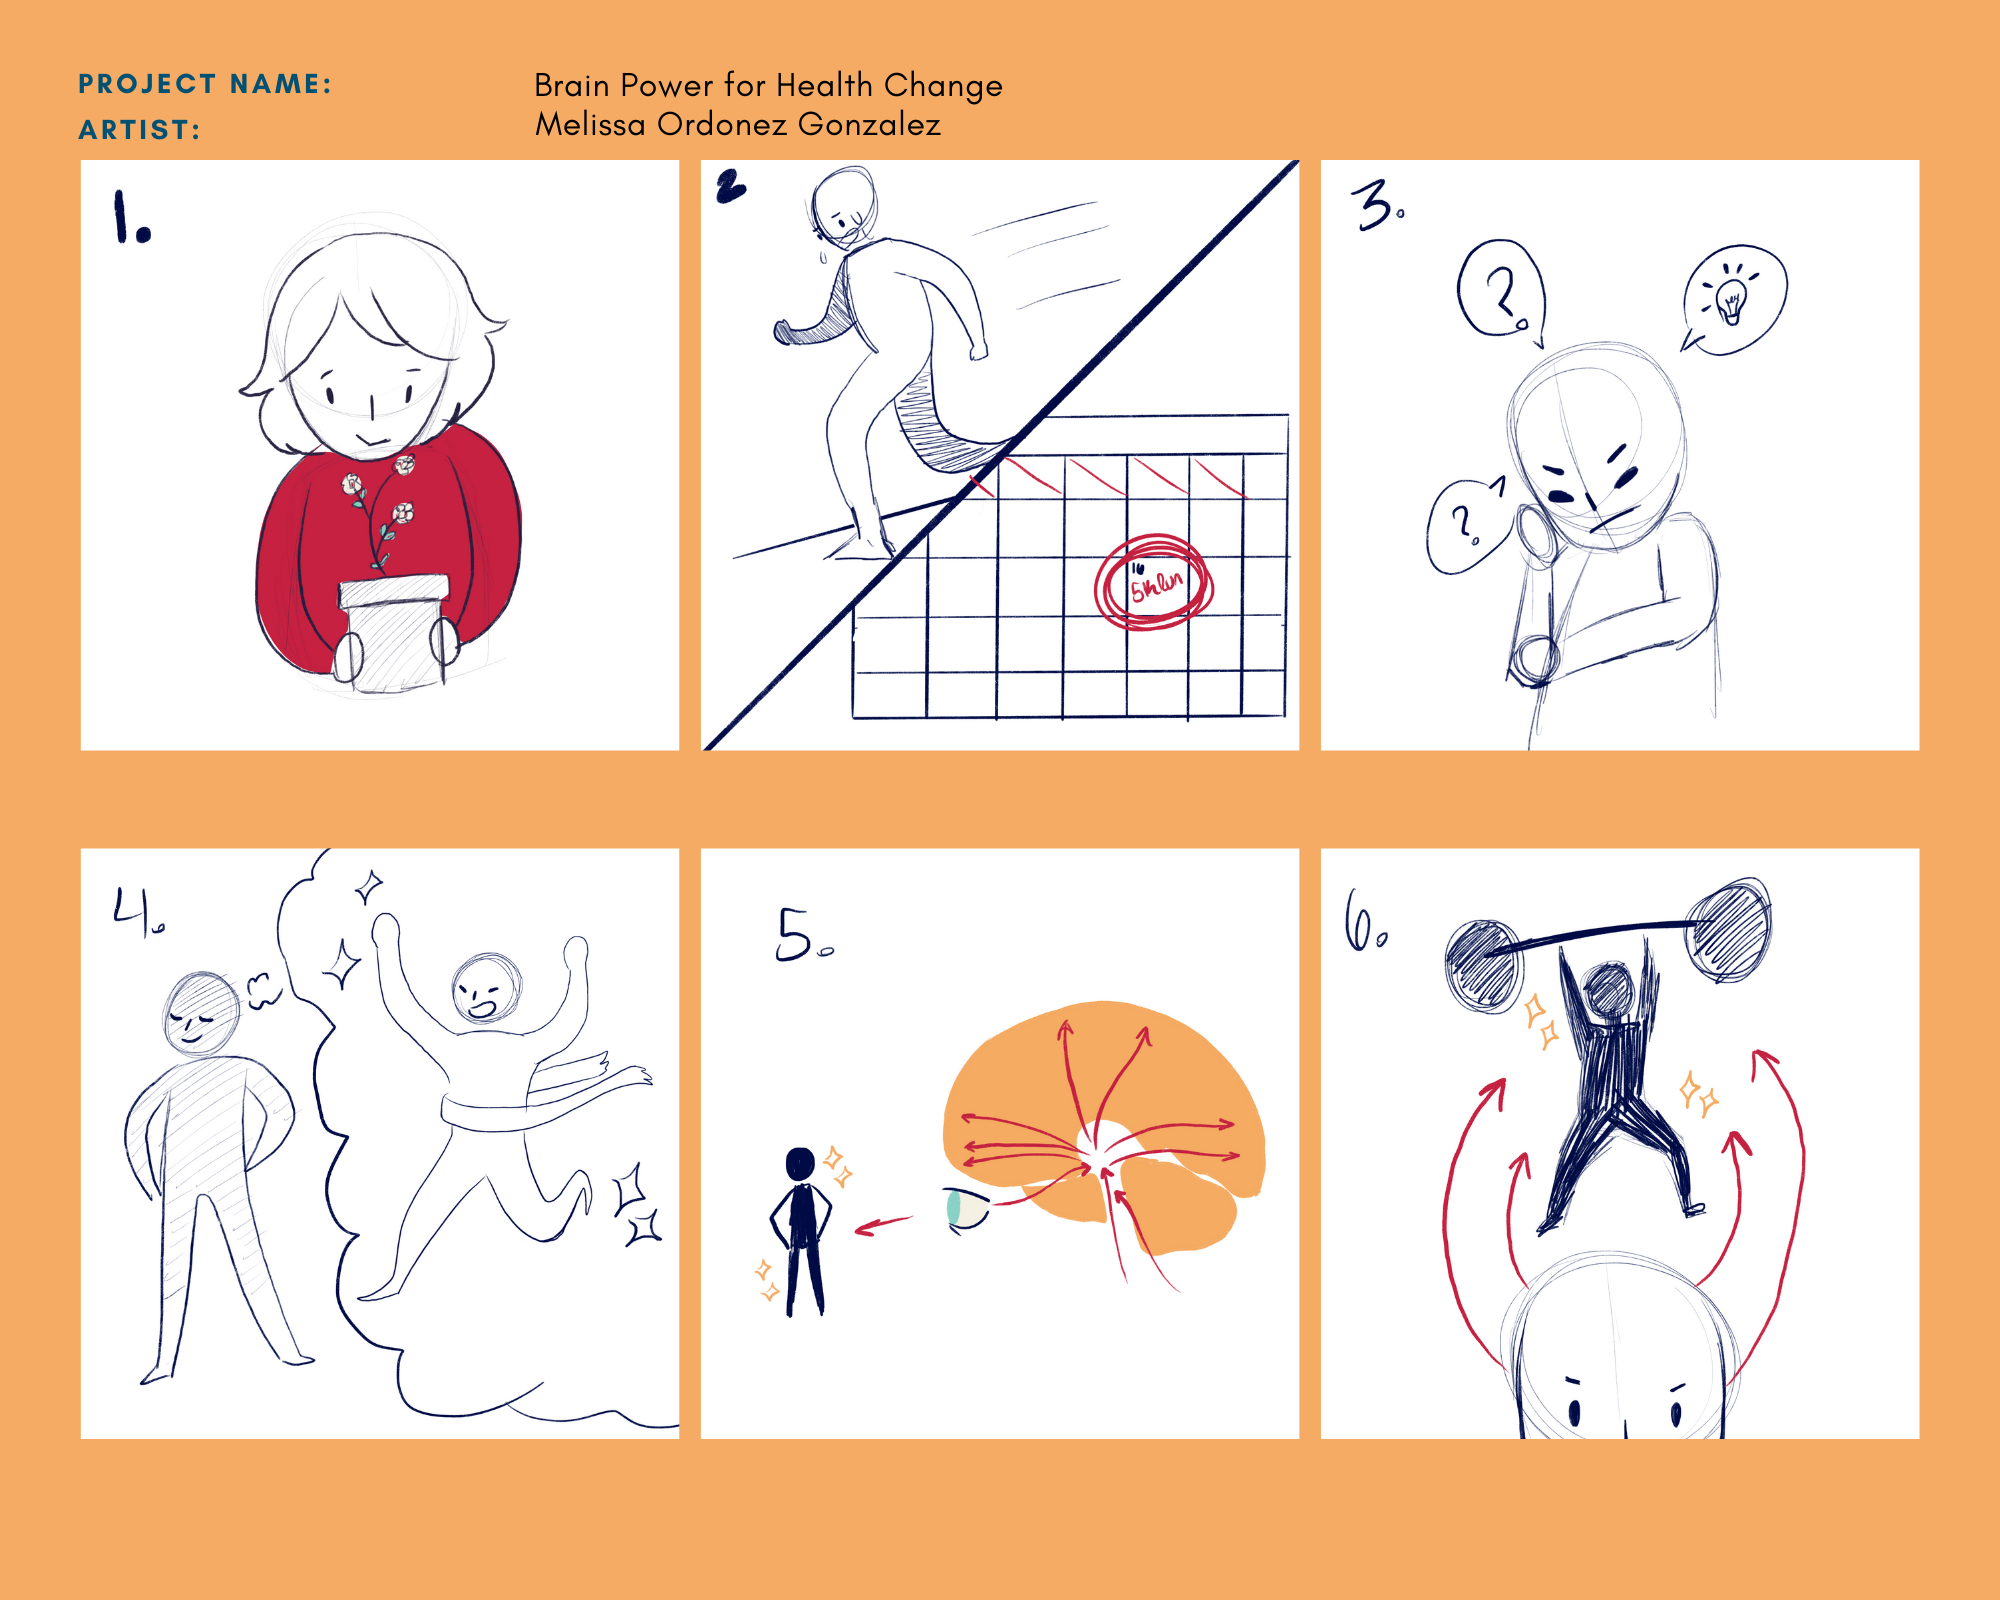 Brain Power Course Image showing storyboarding. Quick rough line drawings of figures visualizing positive outcomes by Melissa Ordonez Gonzalez